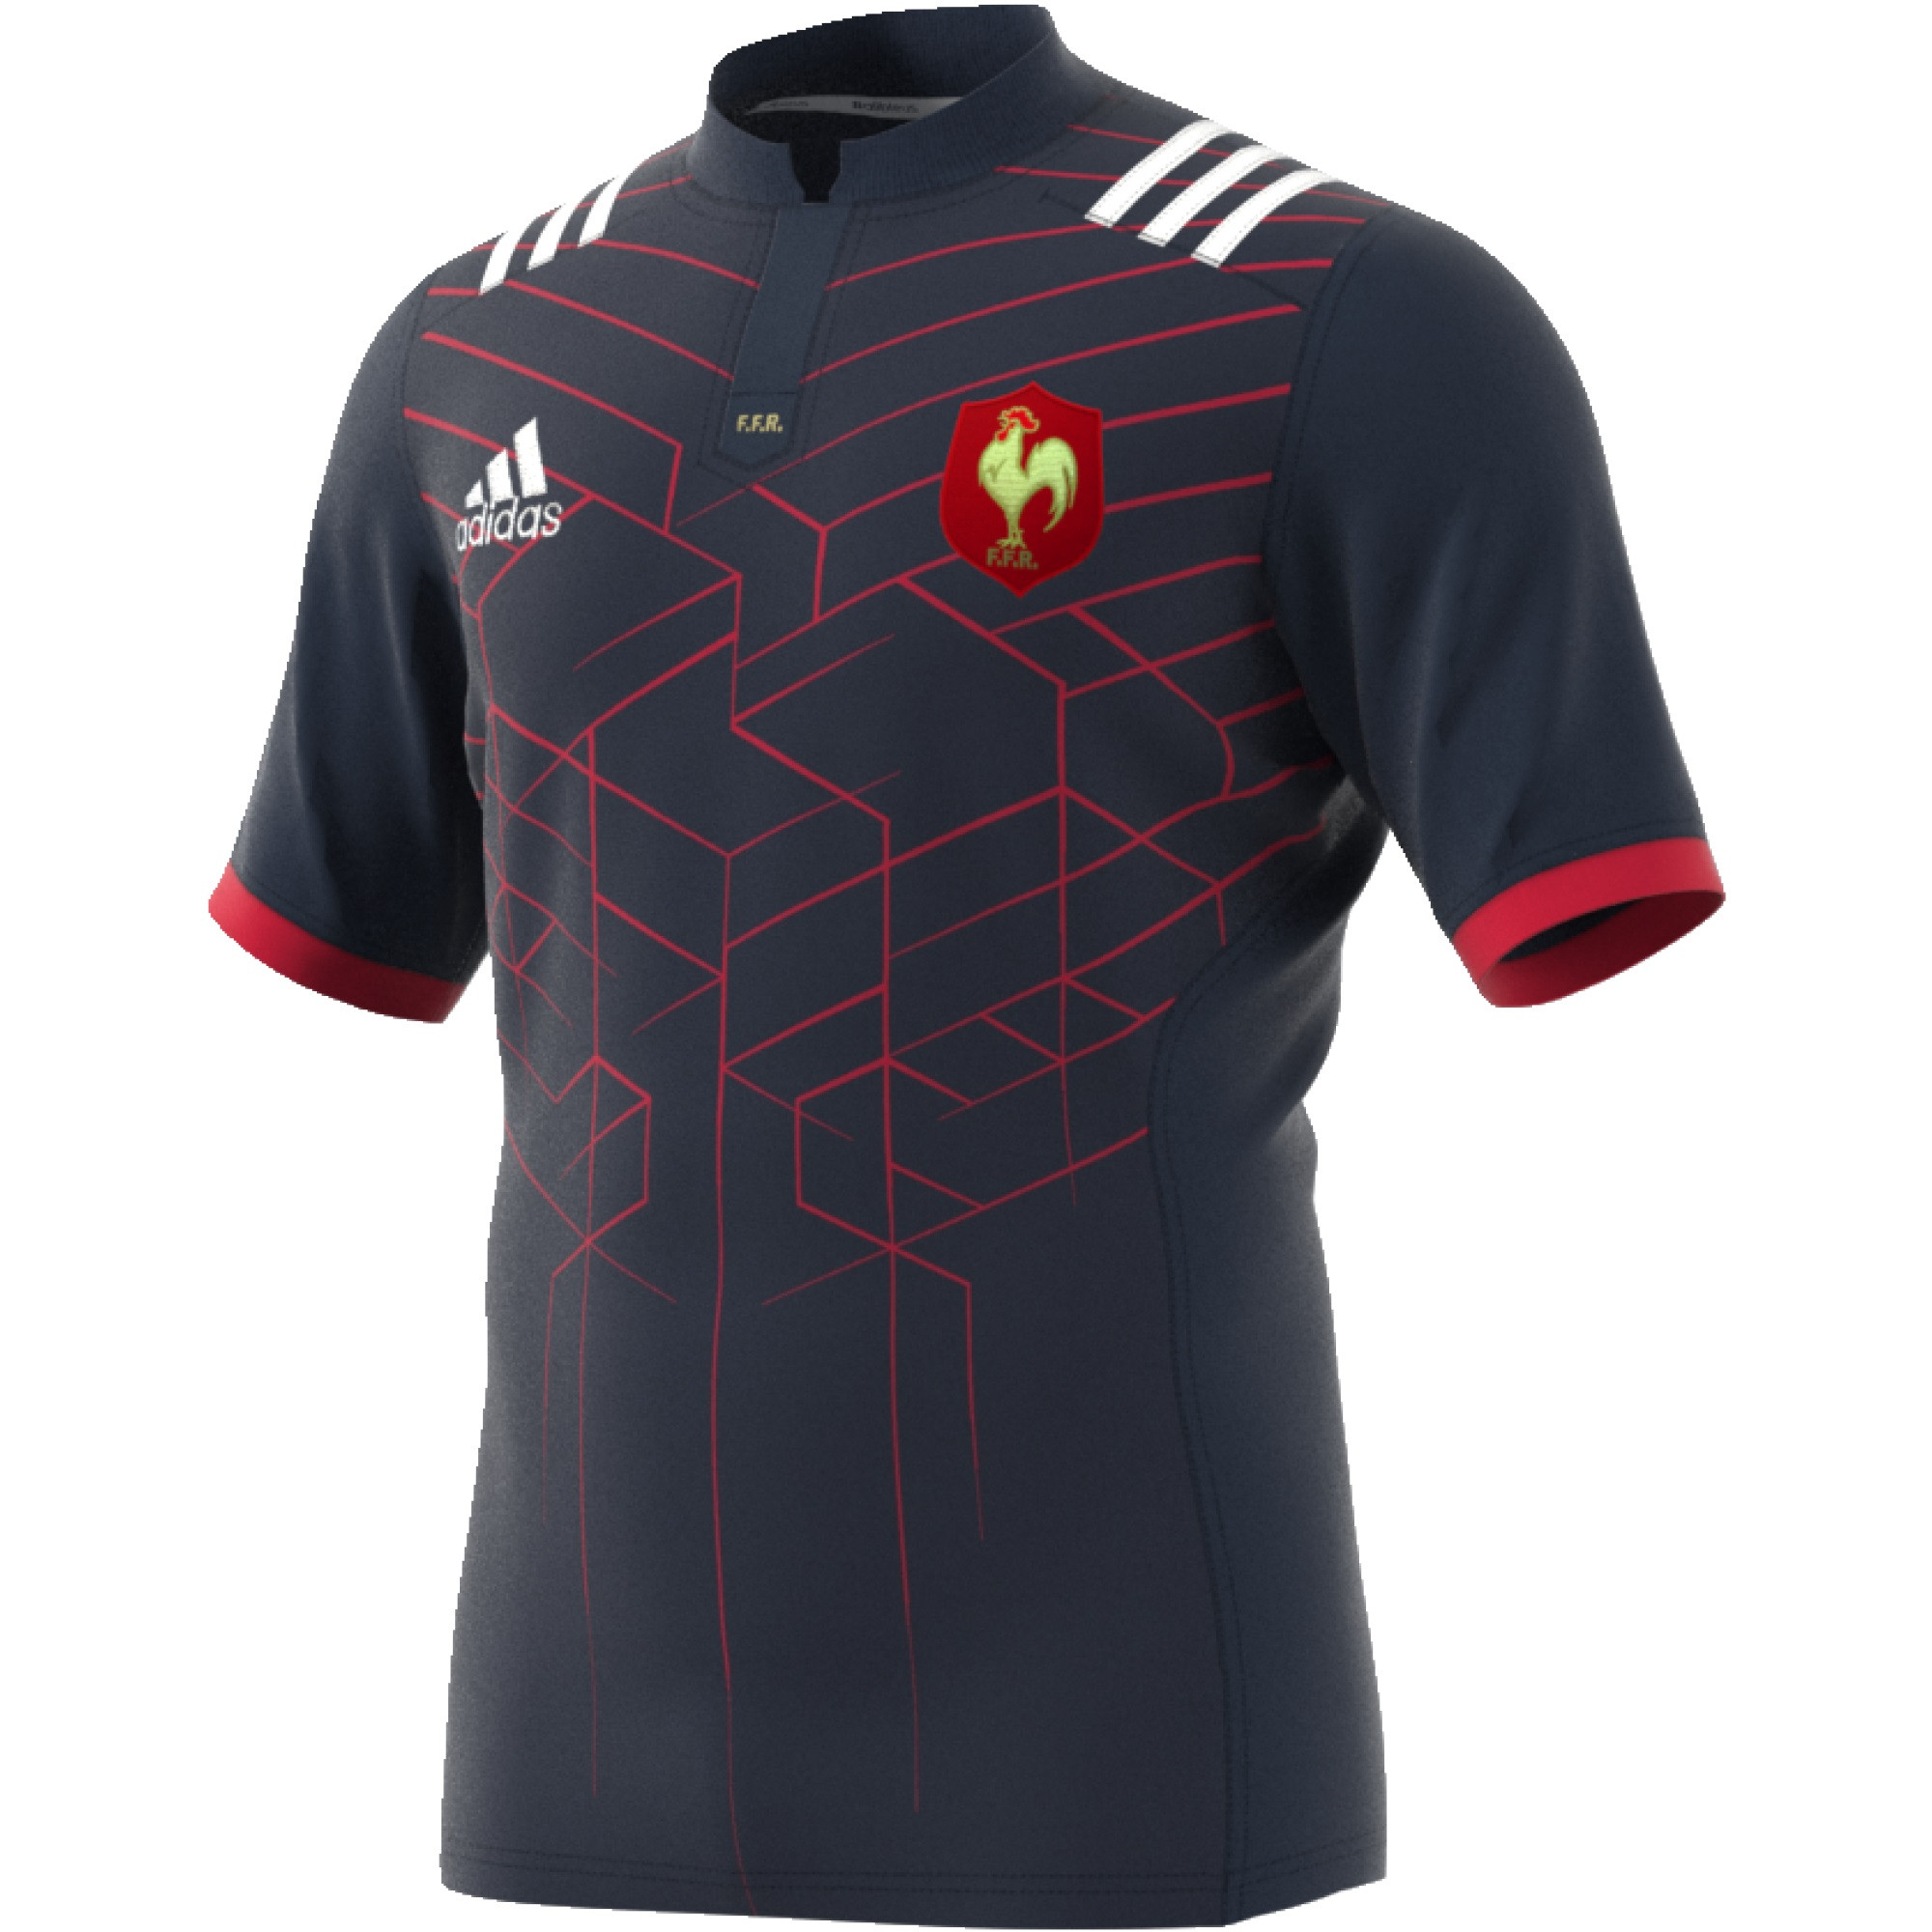 ADIDAS FFR RUGBY MAILLOT DOMICILE 2016/2017